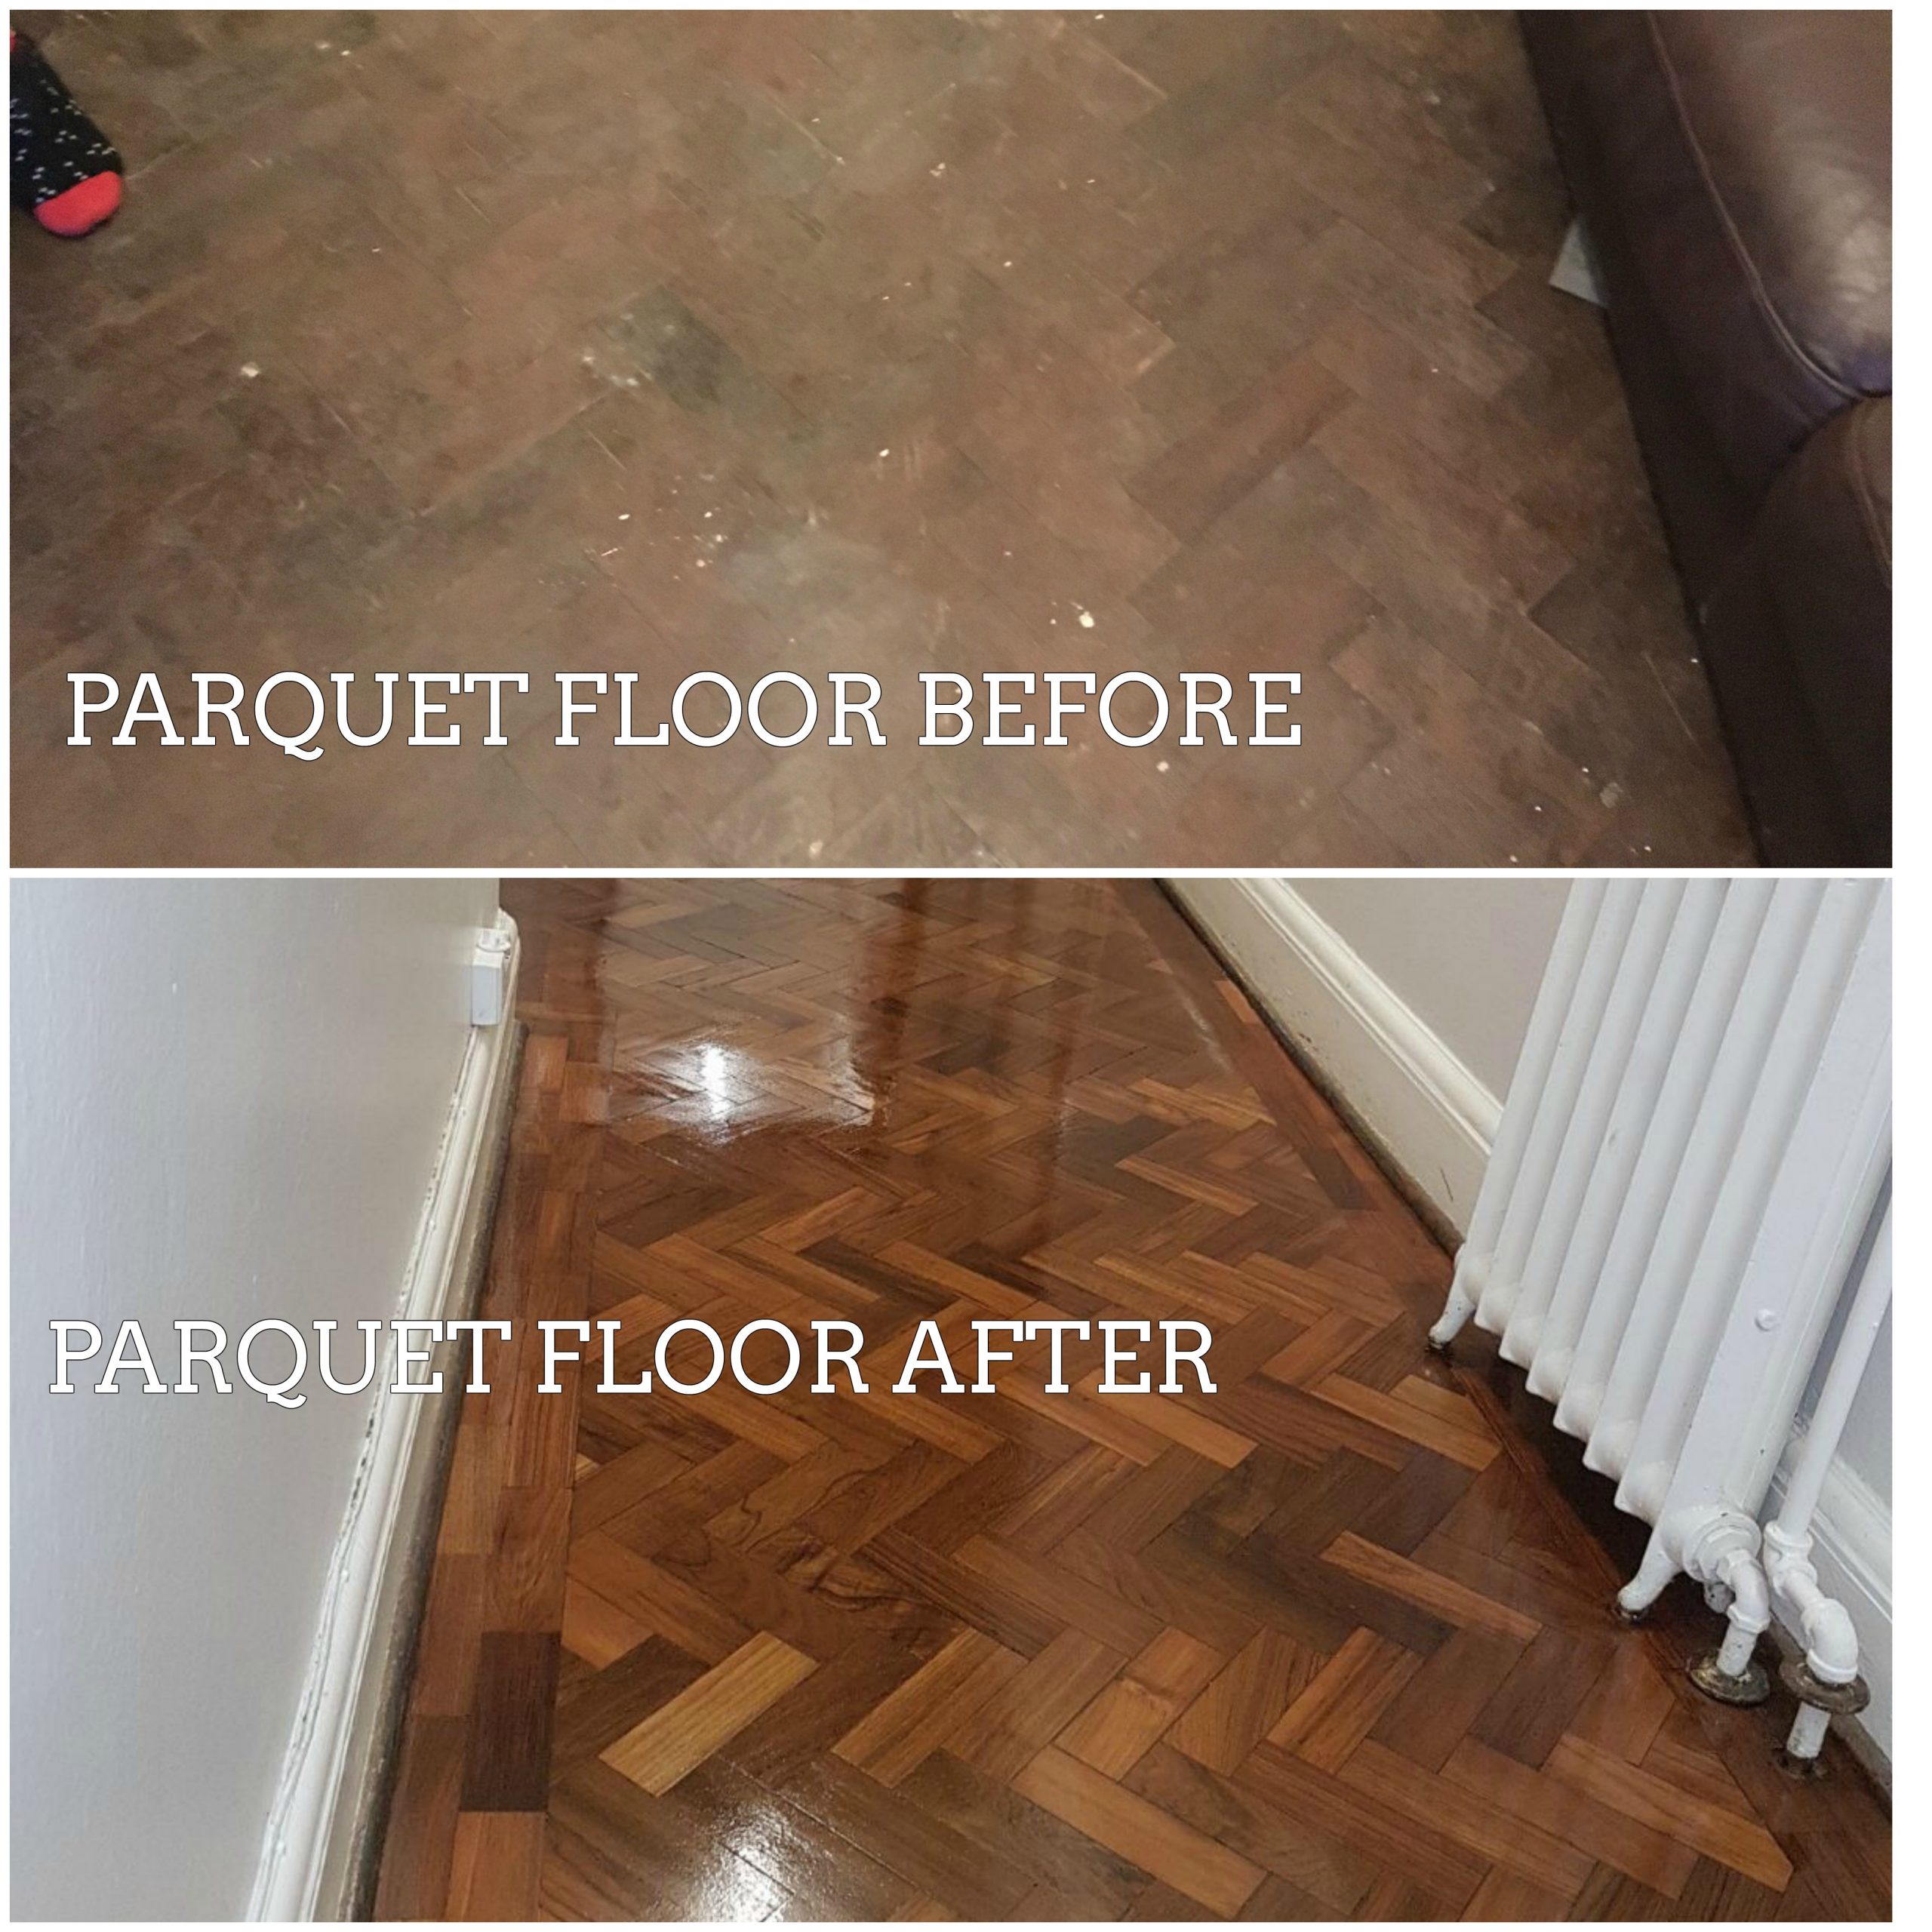 PARQUET-FLOOR-BEFORE-AND-AFTER-WORK-PICTURES brighton